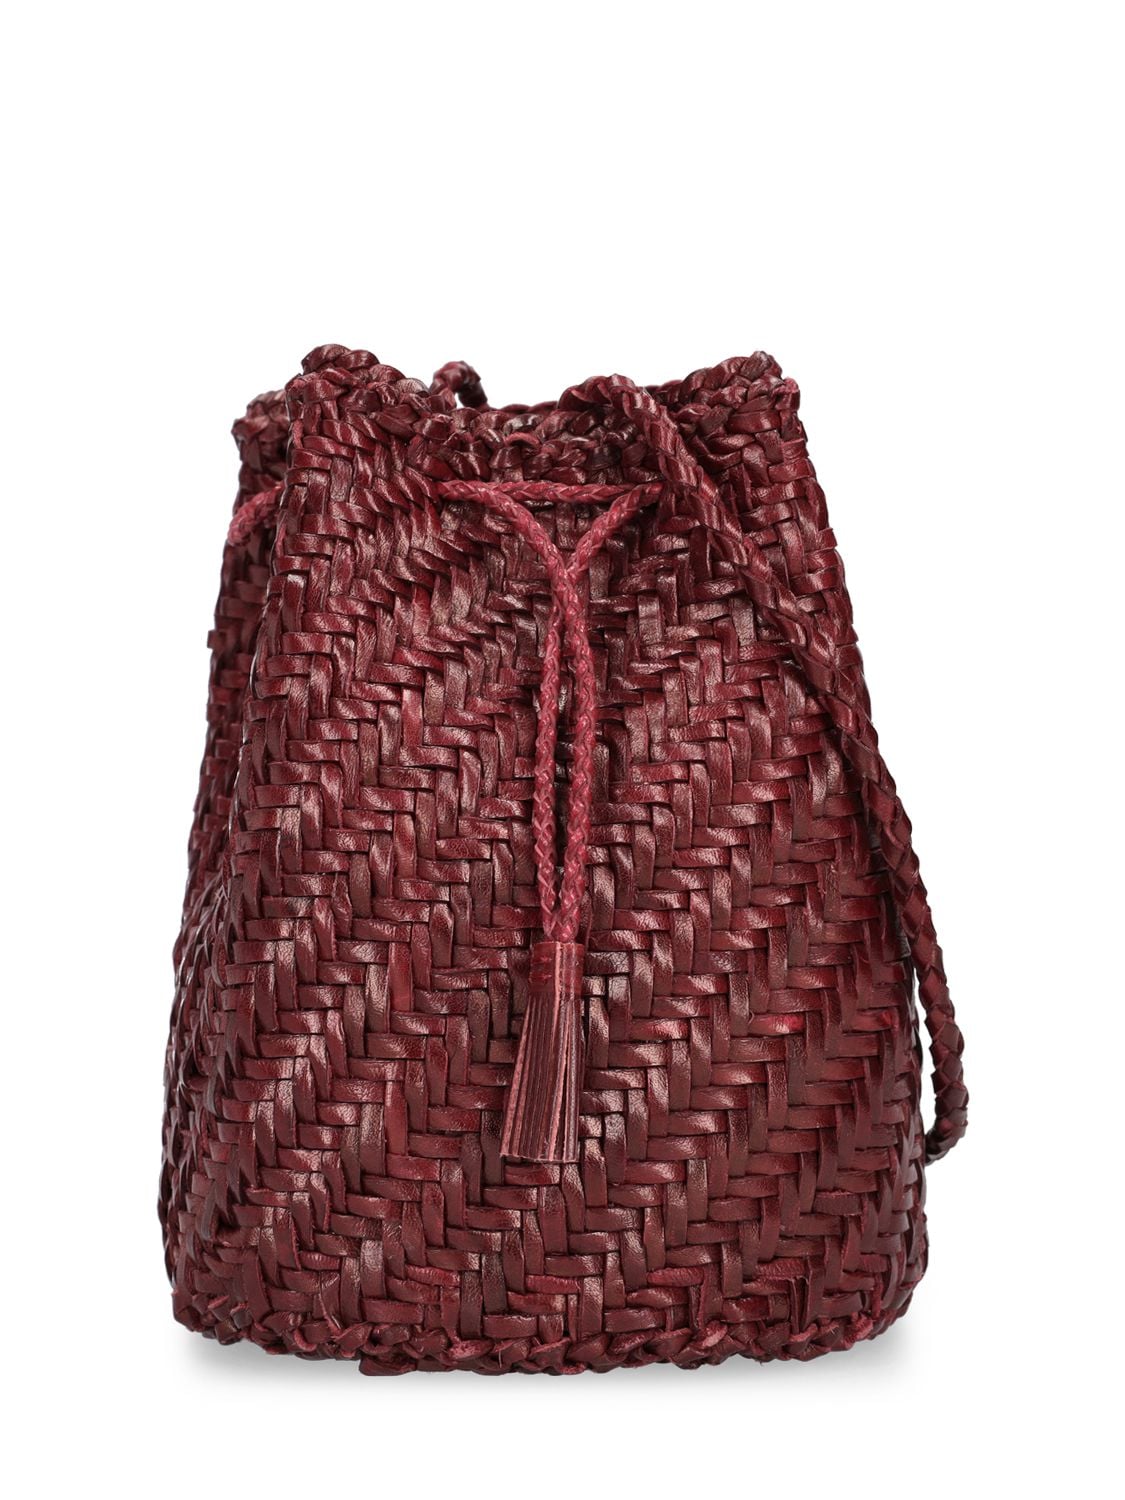 Dragon Diffusion Pompom Doublej Woven Leather Basket Bag In Bordeaux